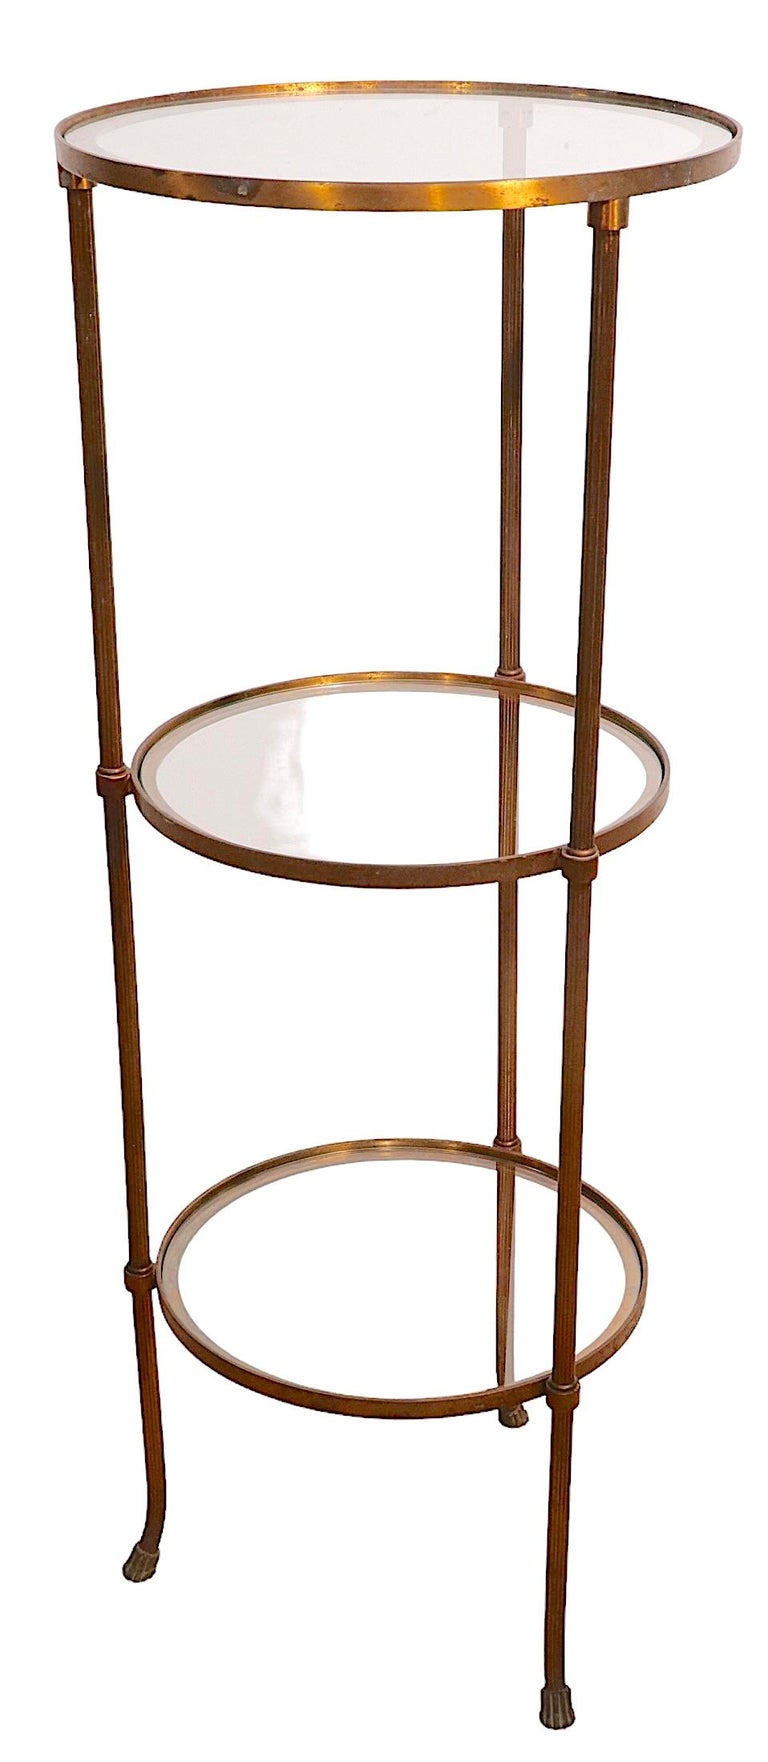 Three Tier Brass and Glass Etagere Display Shelf For Sale 2